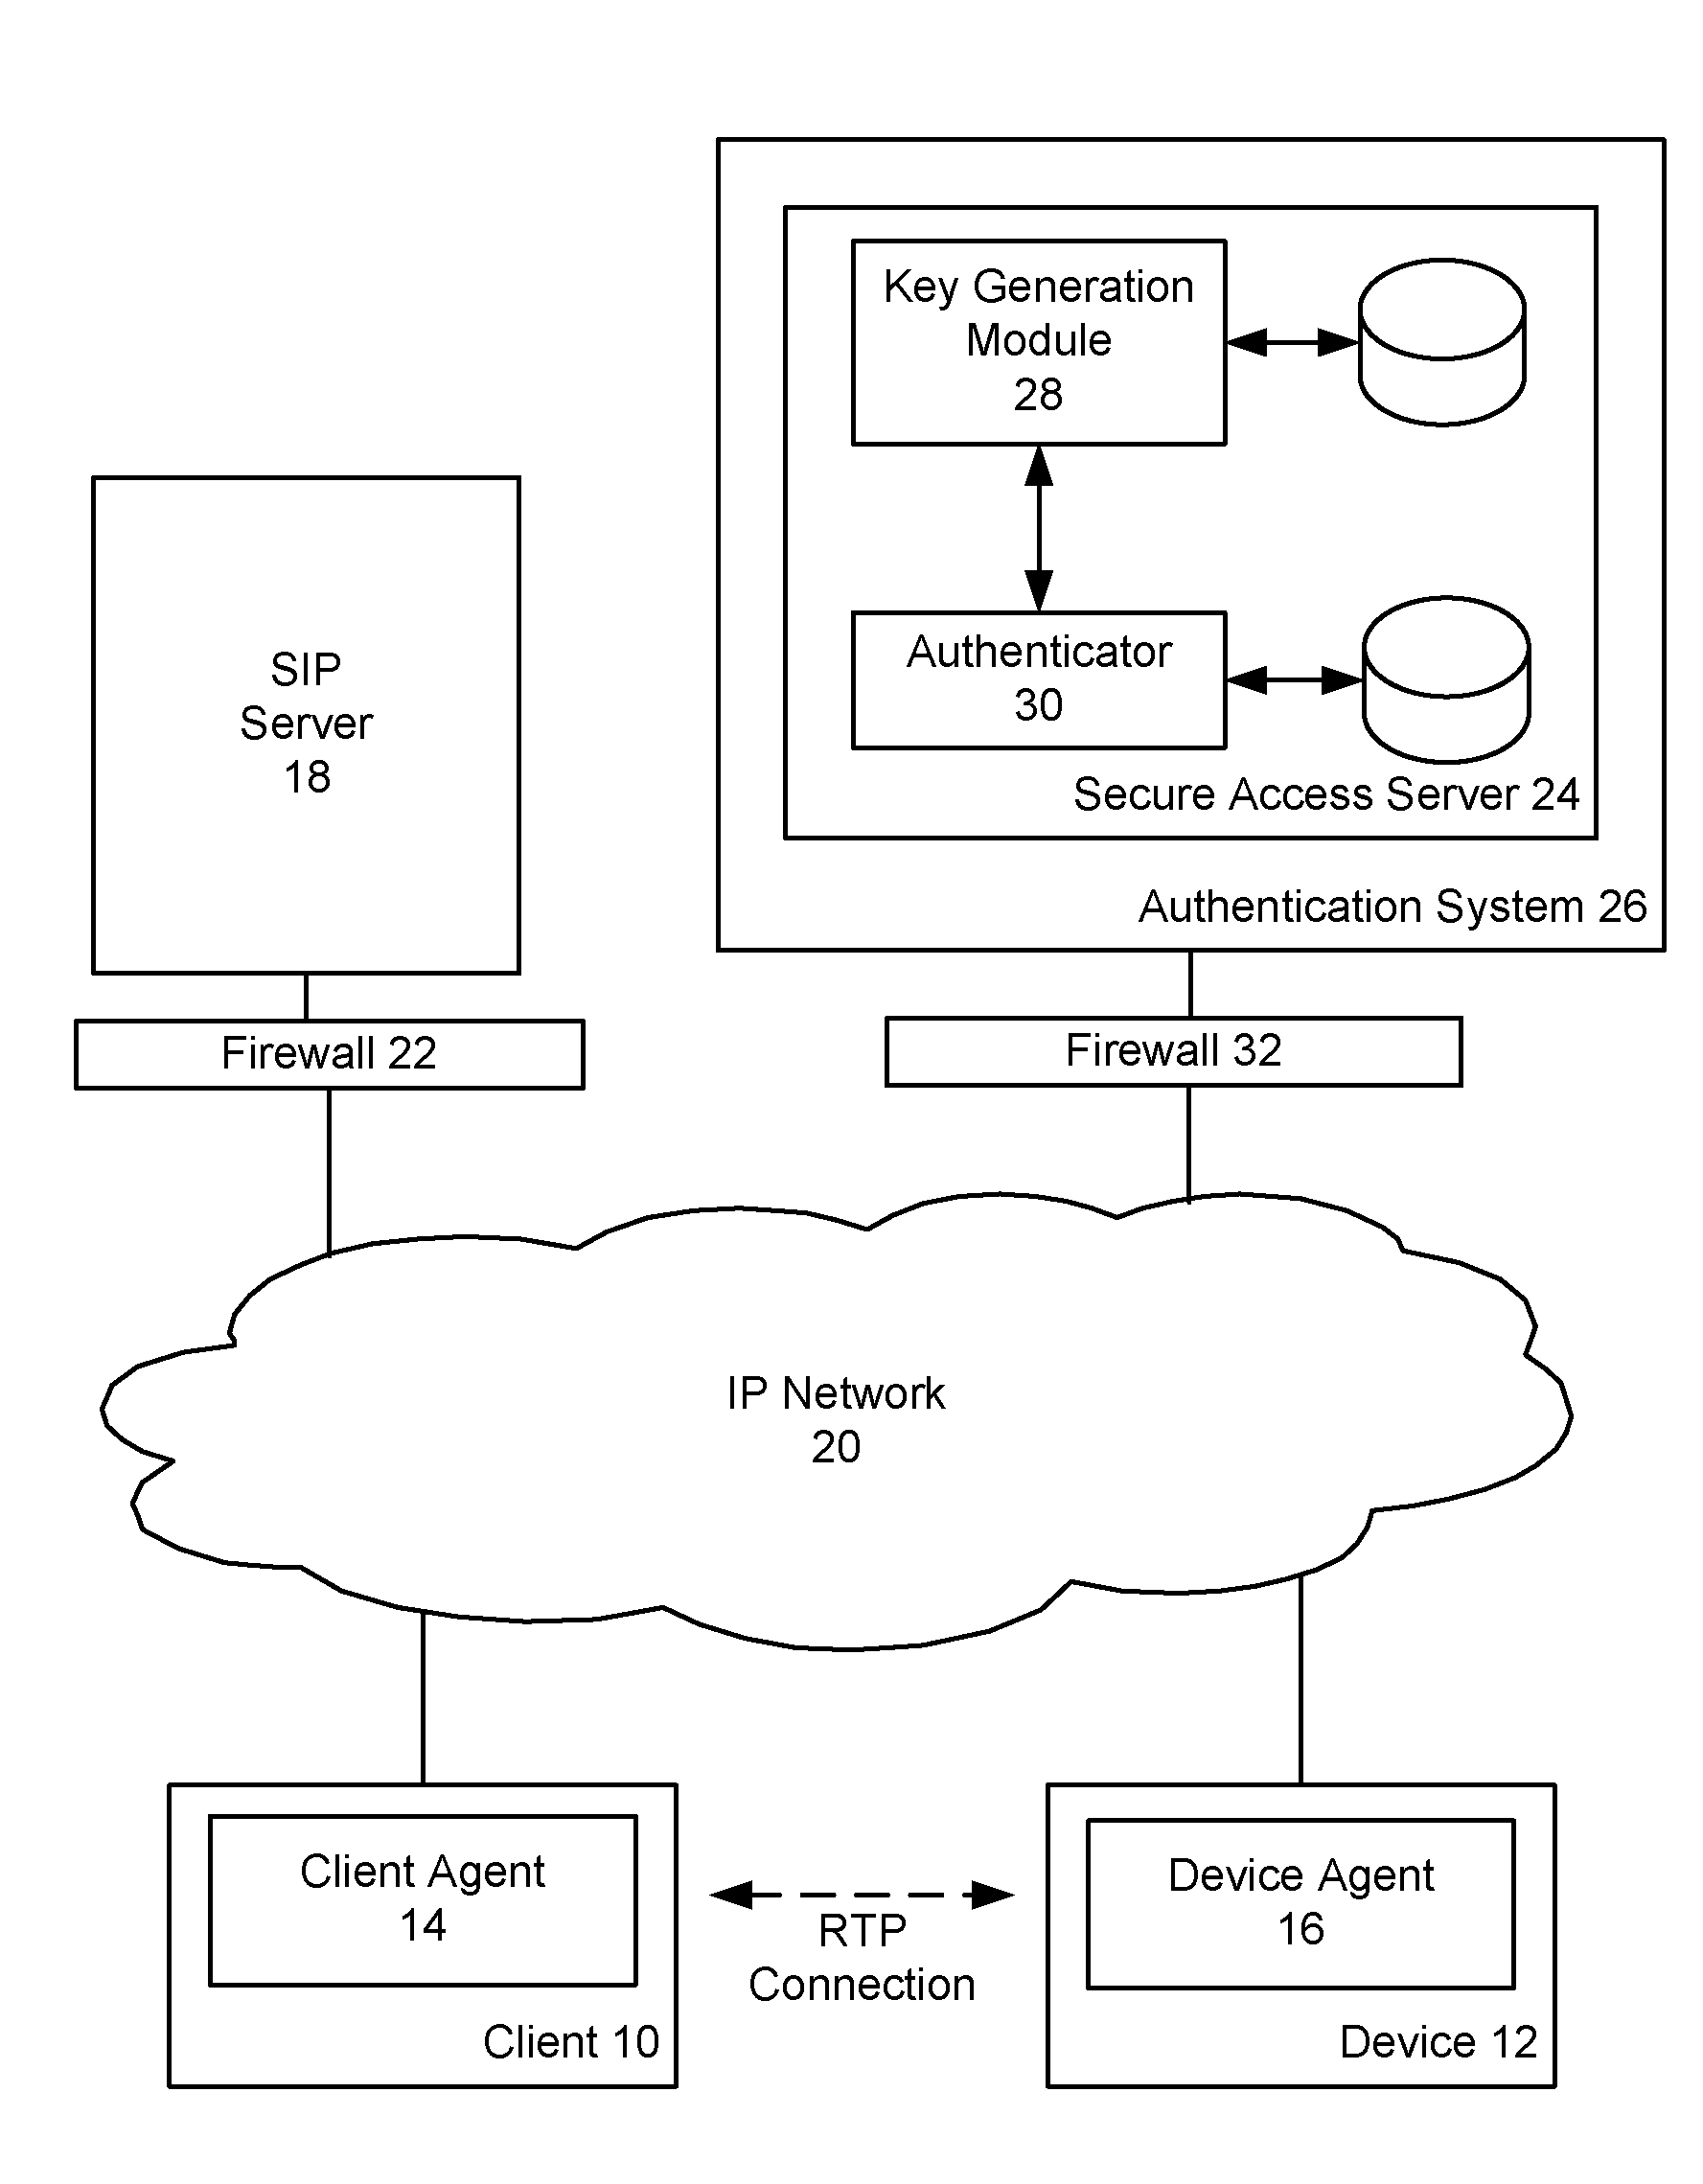 Device authentication and secure channel management for peer-to-peer initiated communications